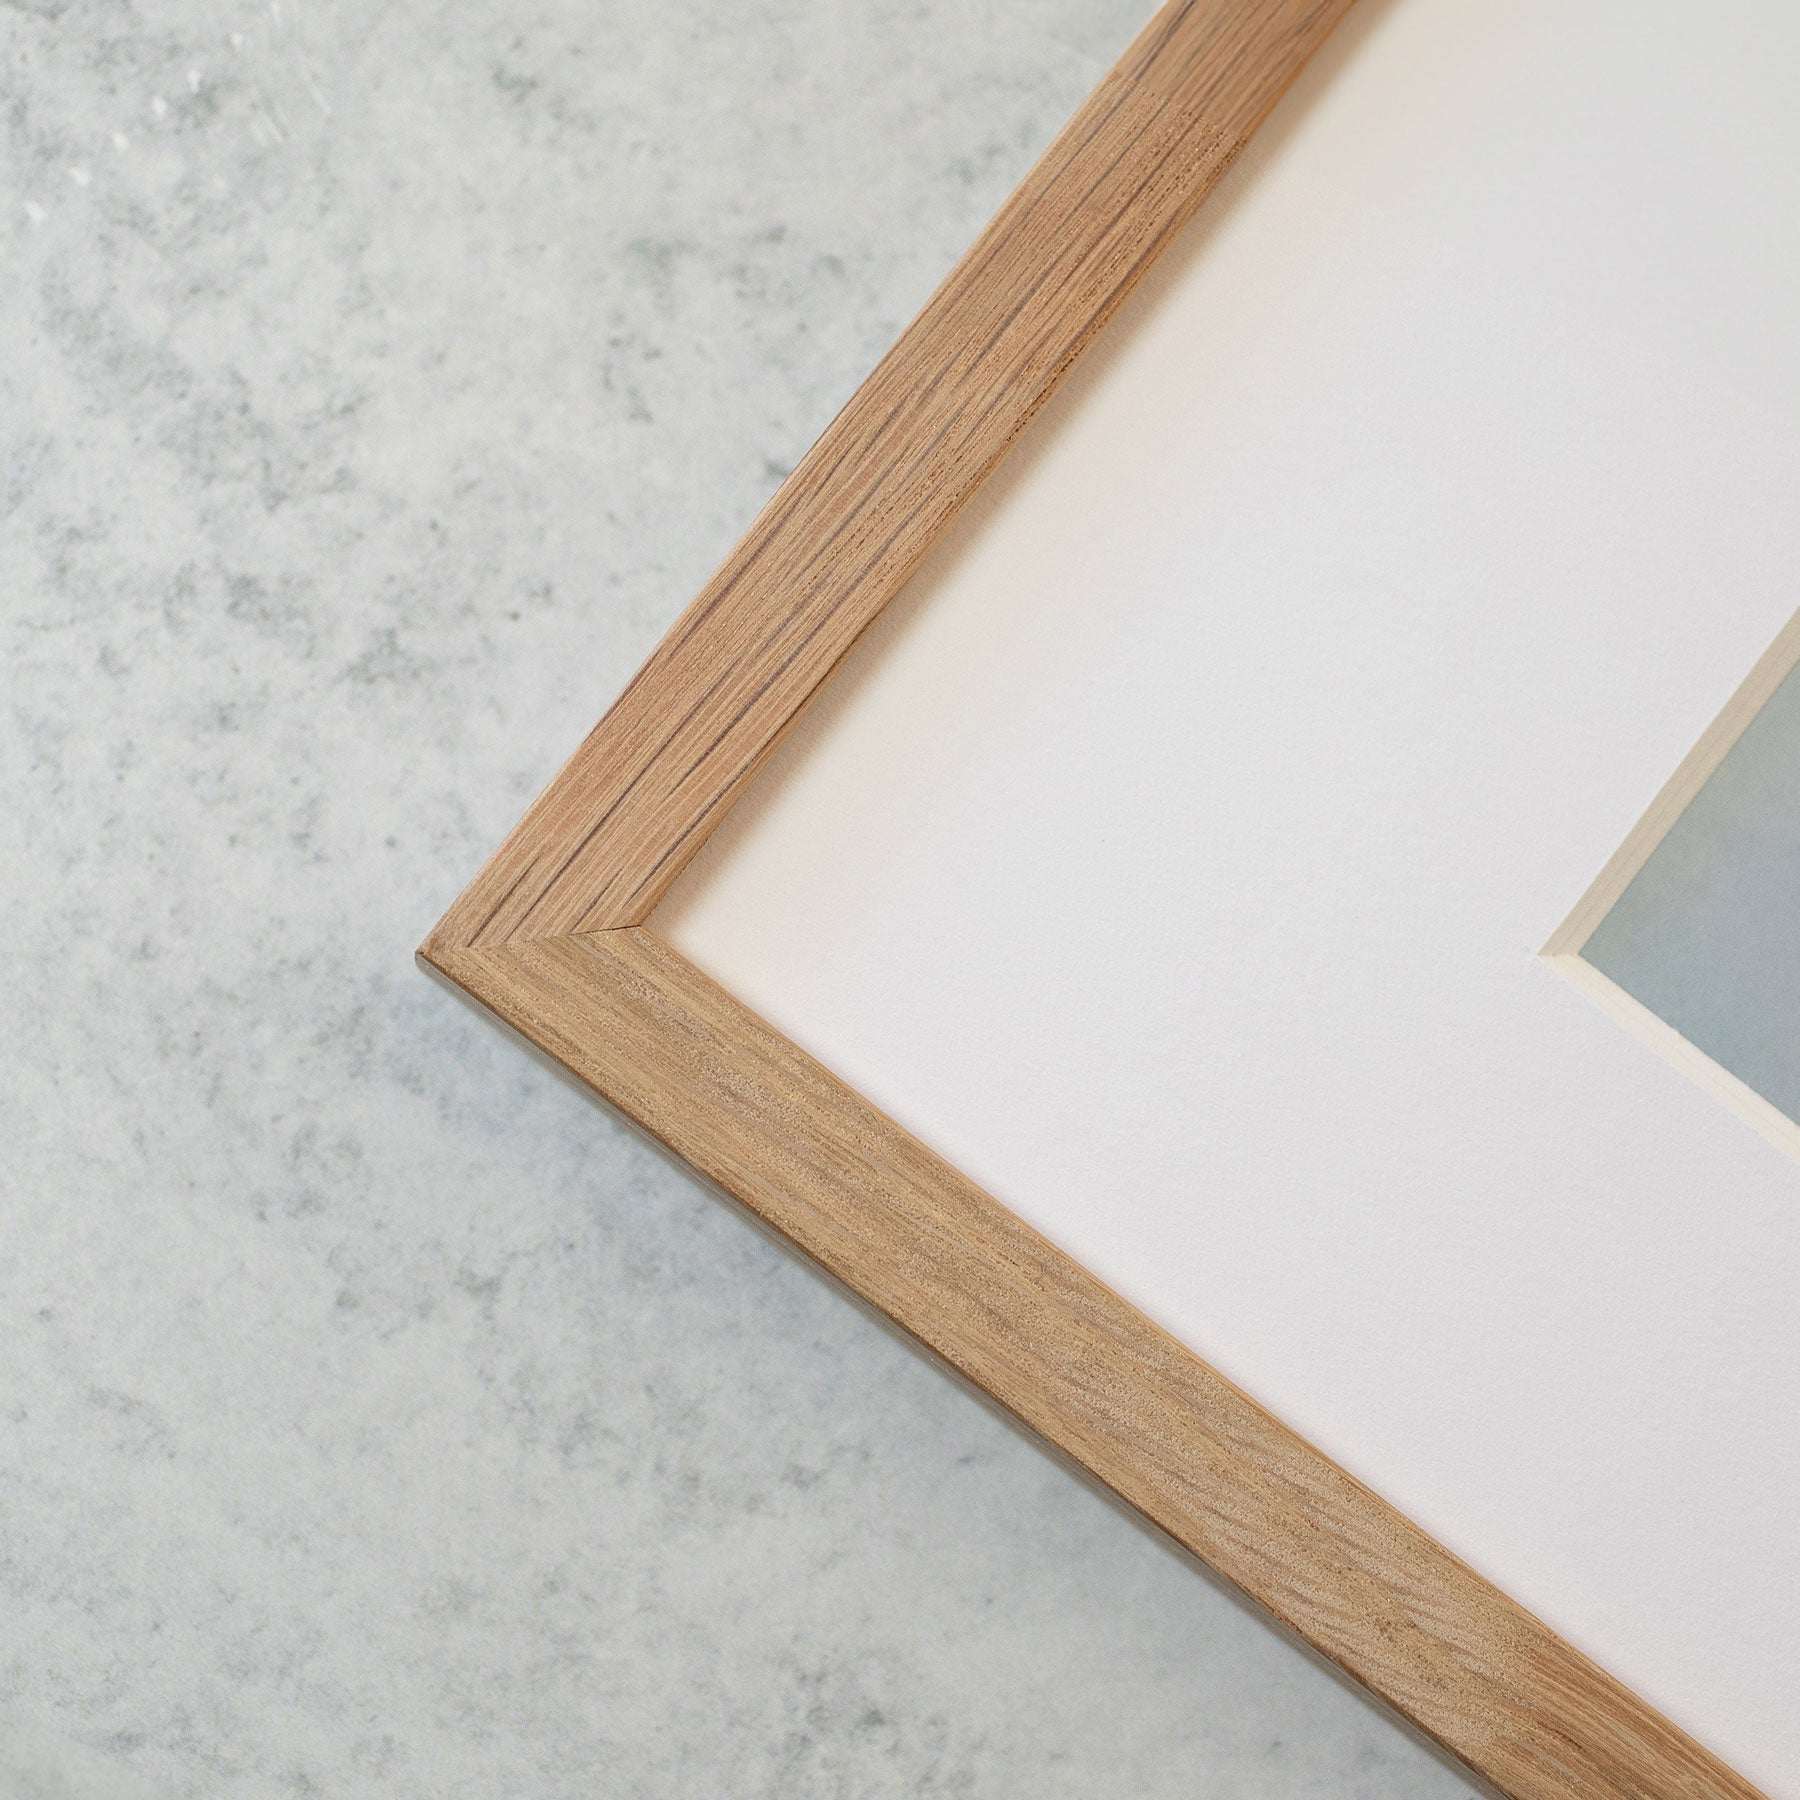 Close-up of an unframed Offley Green print on a marble surface, showcasing the detailed wood grain of a wooden picture frame corner and the smooth, blank white matting inside.